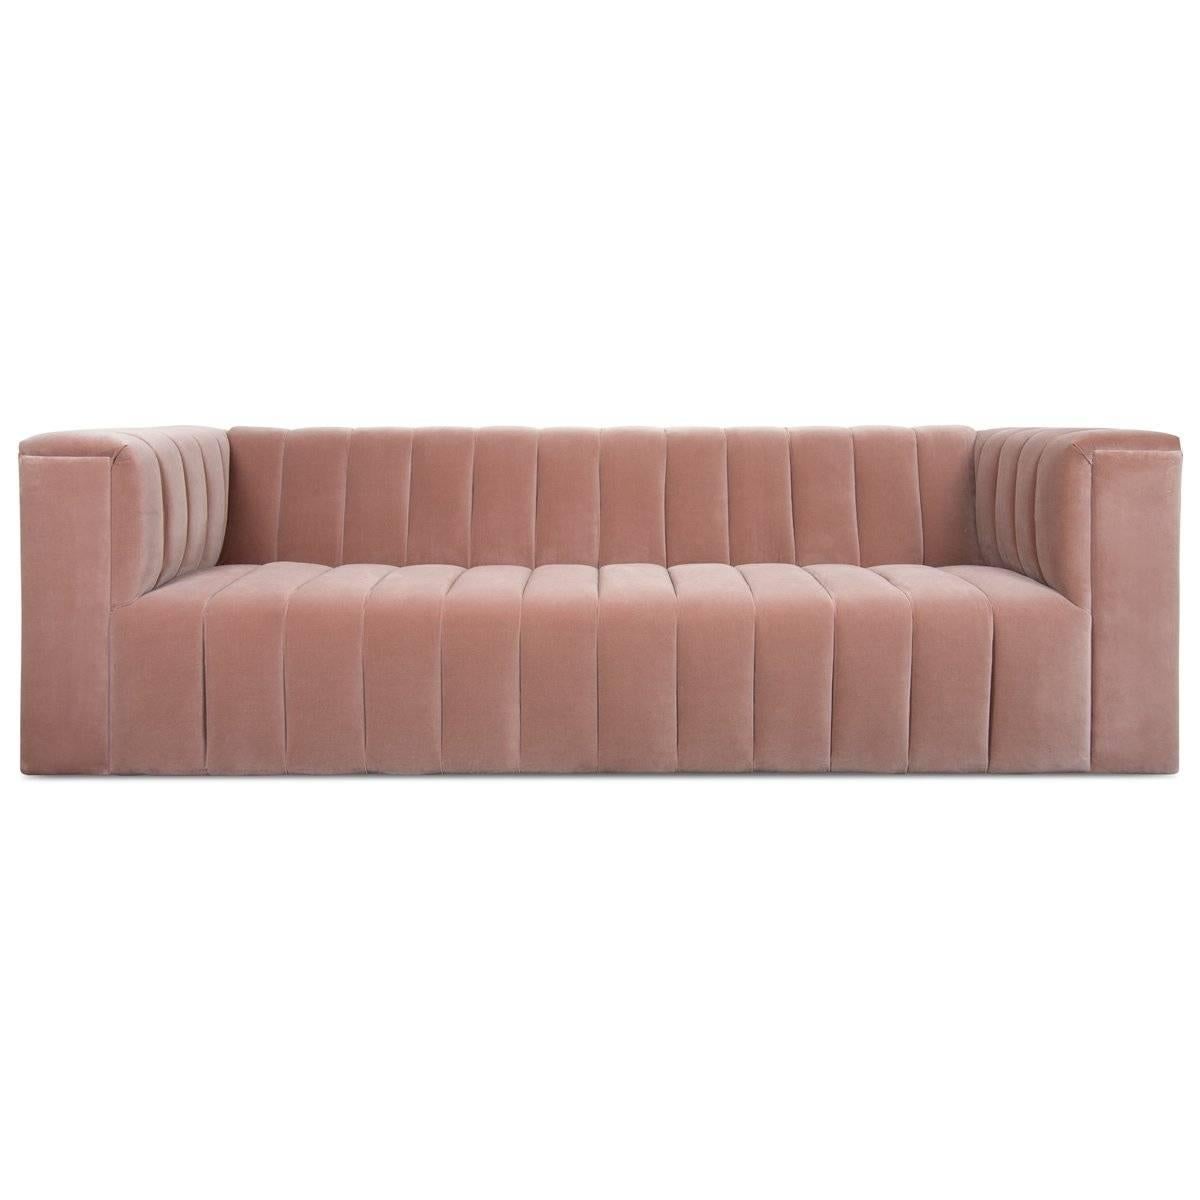 Elevate the level of comfort and style within your home with the Monaco sofa in lush velvet in Mauve. Though the deep color and bold design lend this sofa the ability to stand alone, none can deny the brilliance and style it will add to any room.